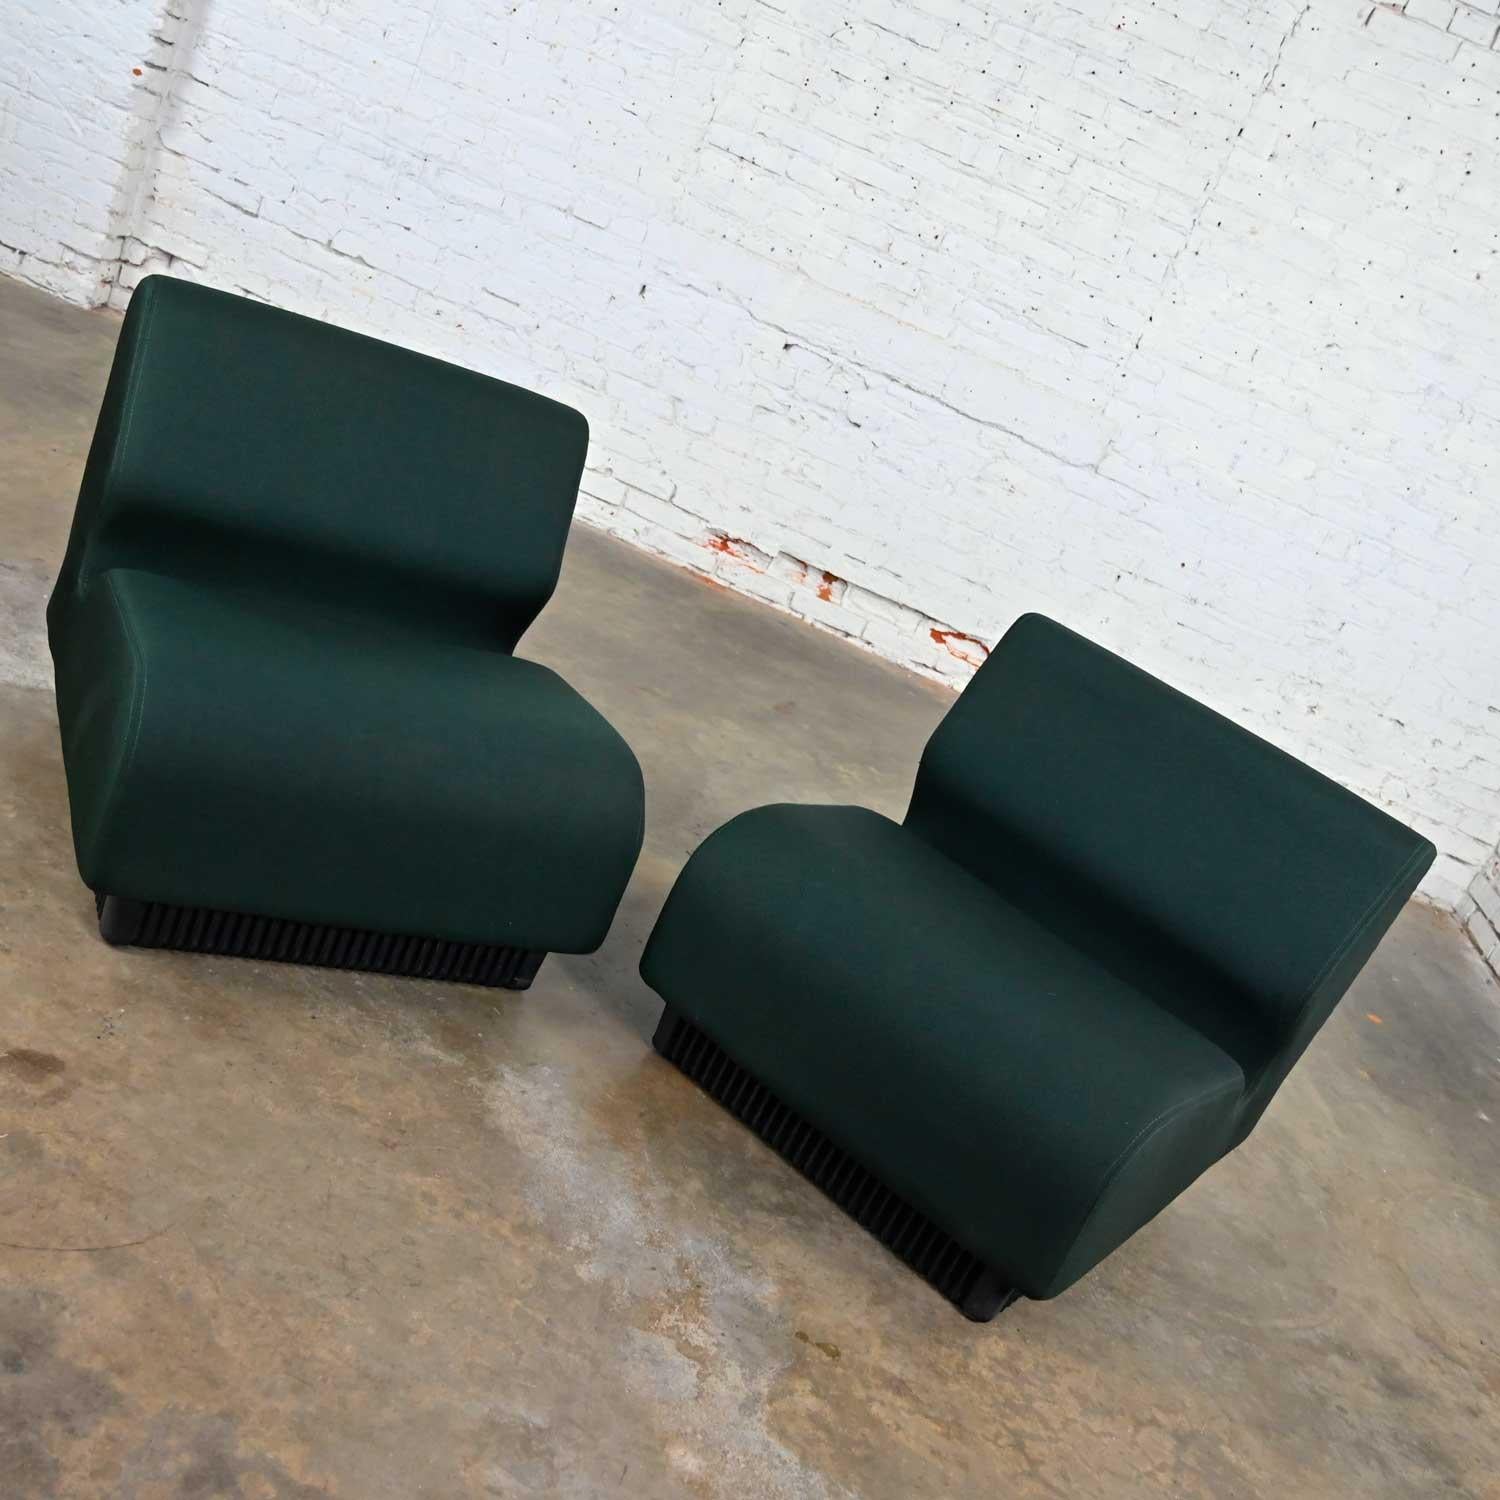 Wonderful modern Herman Miller Don Chadwick modular seating pair of chairs in forest green. Beautiful condition, keeping in mind that these are vintage and not new so will have signs of use and wear. These have been professionally cleaned and are